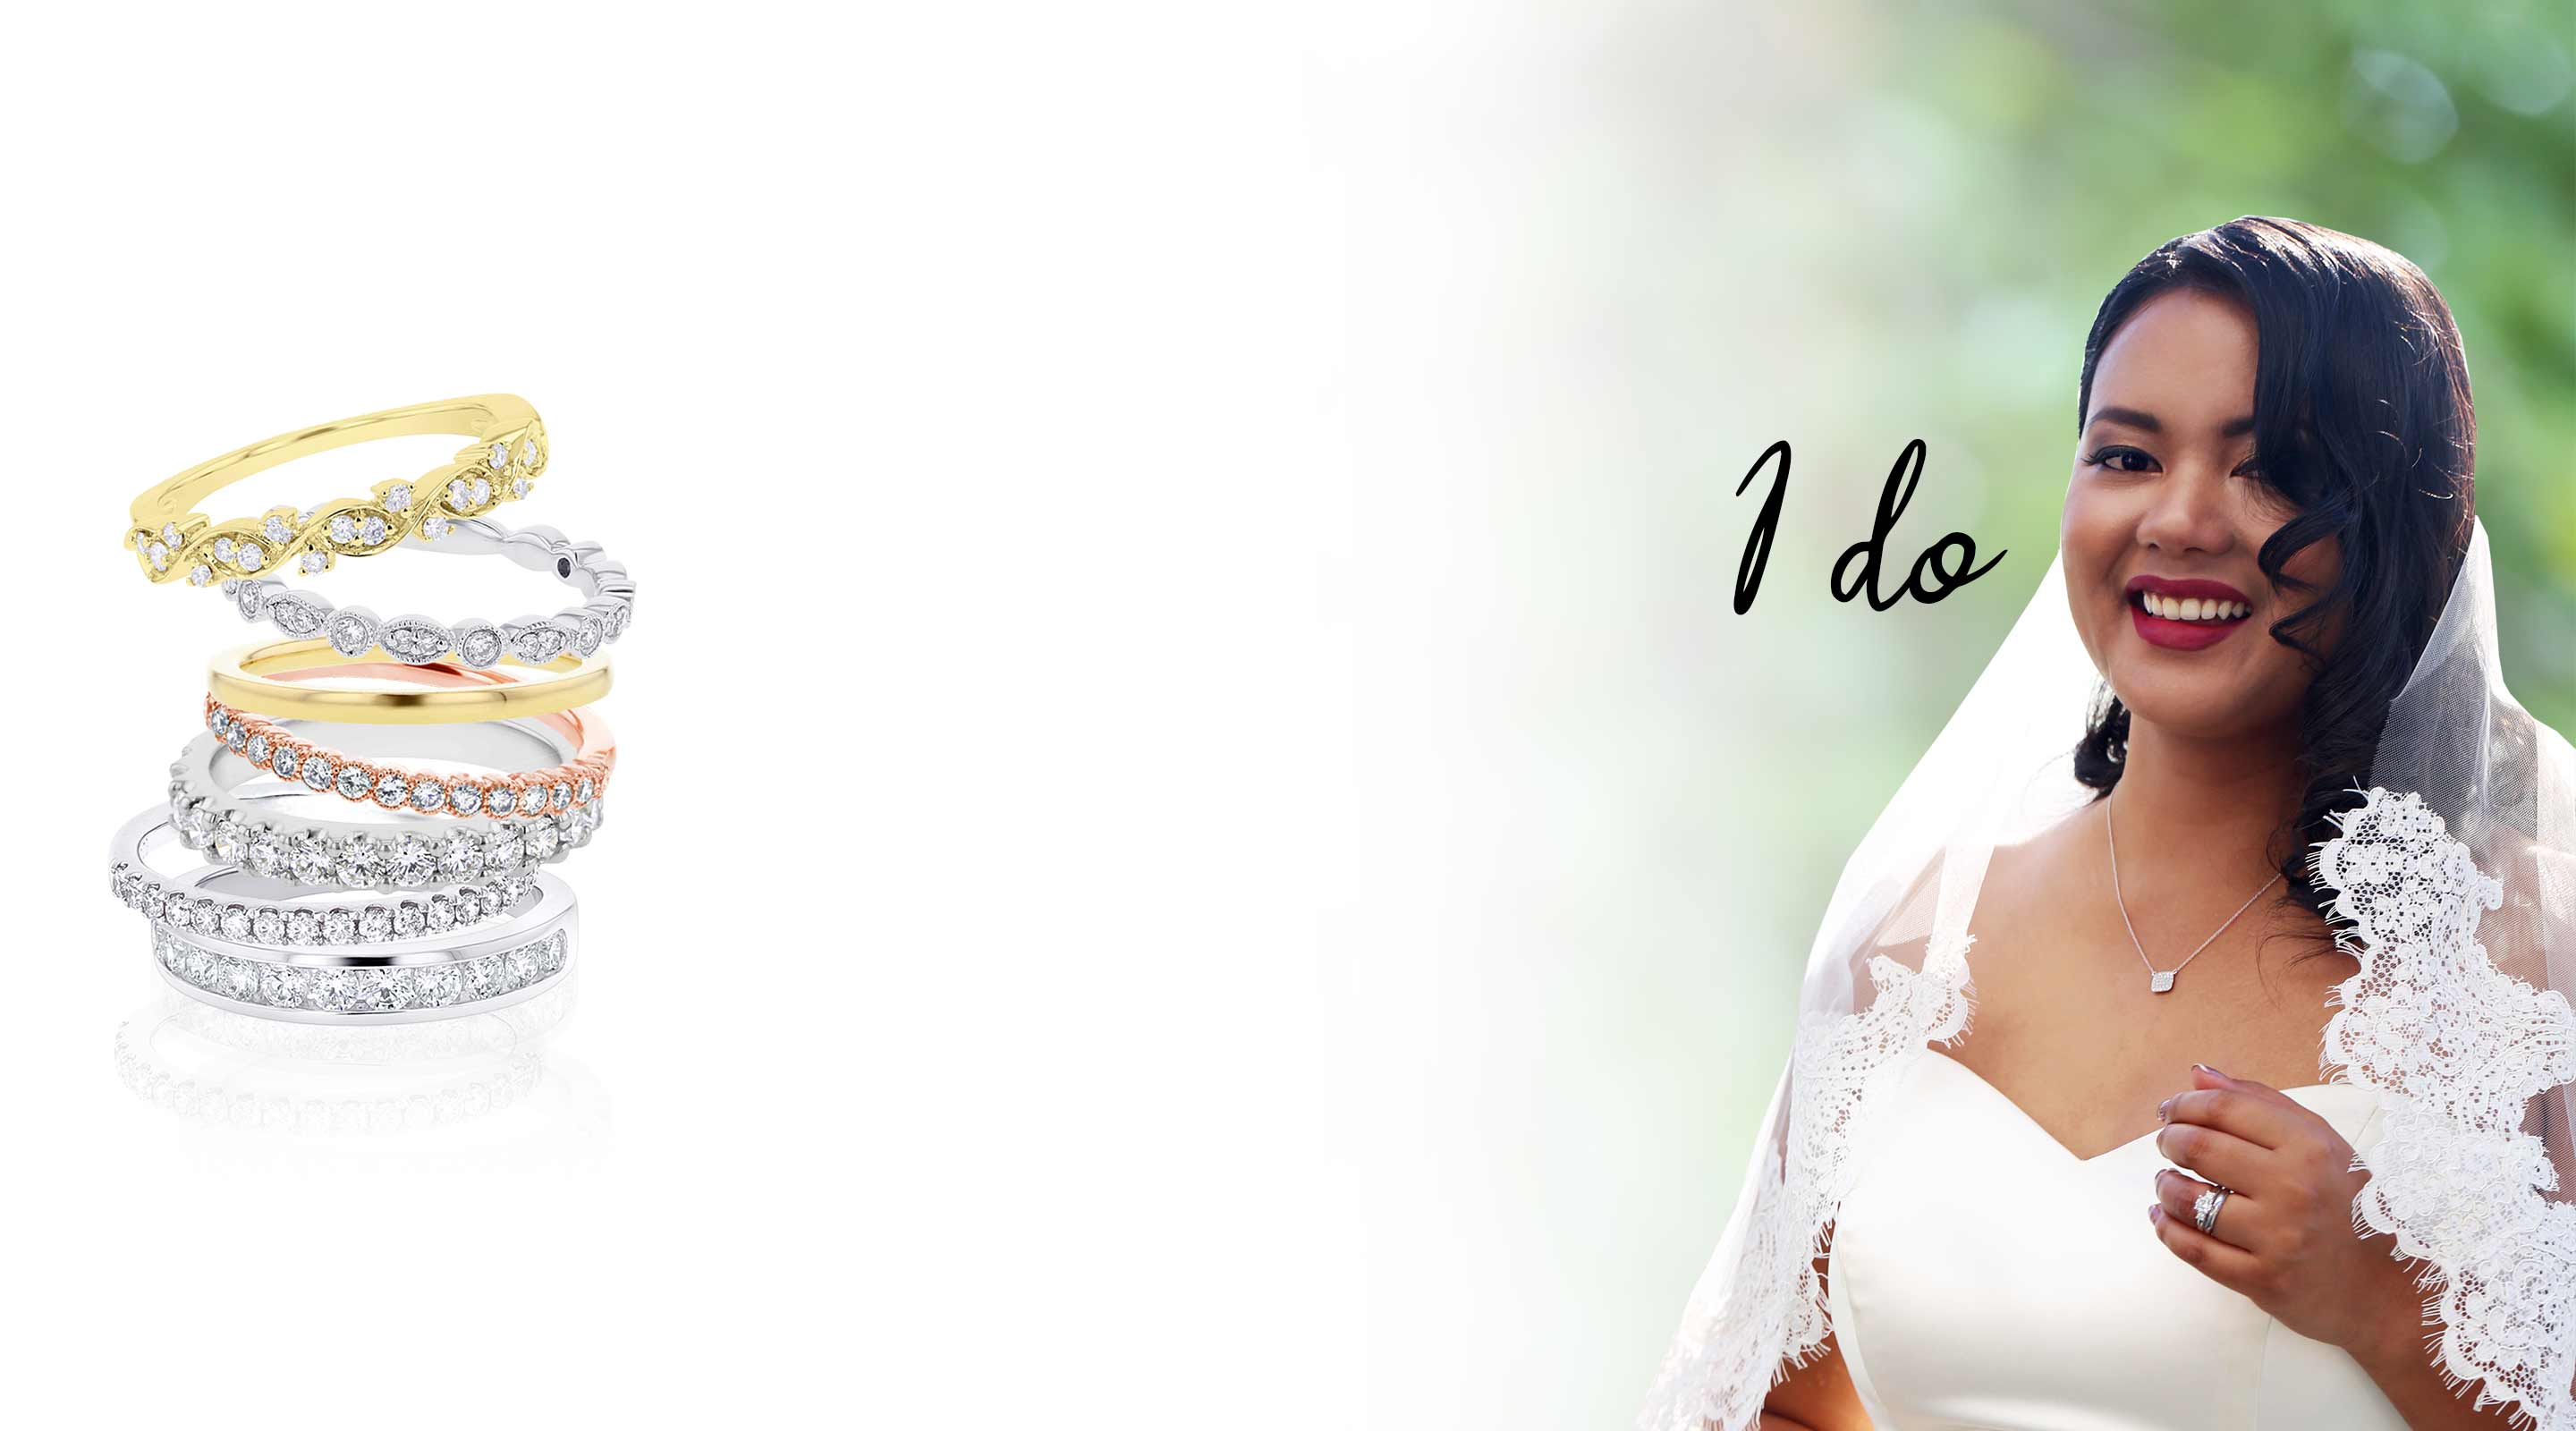 A smiling bride on her wedding day with featured diamond wedding band product shots.